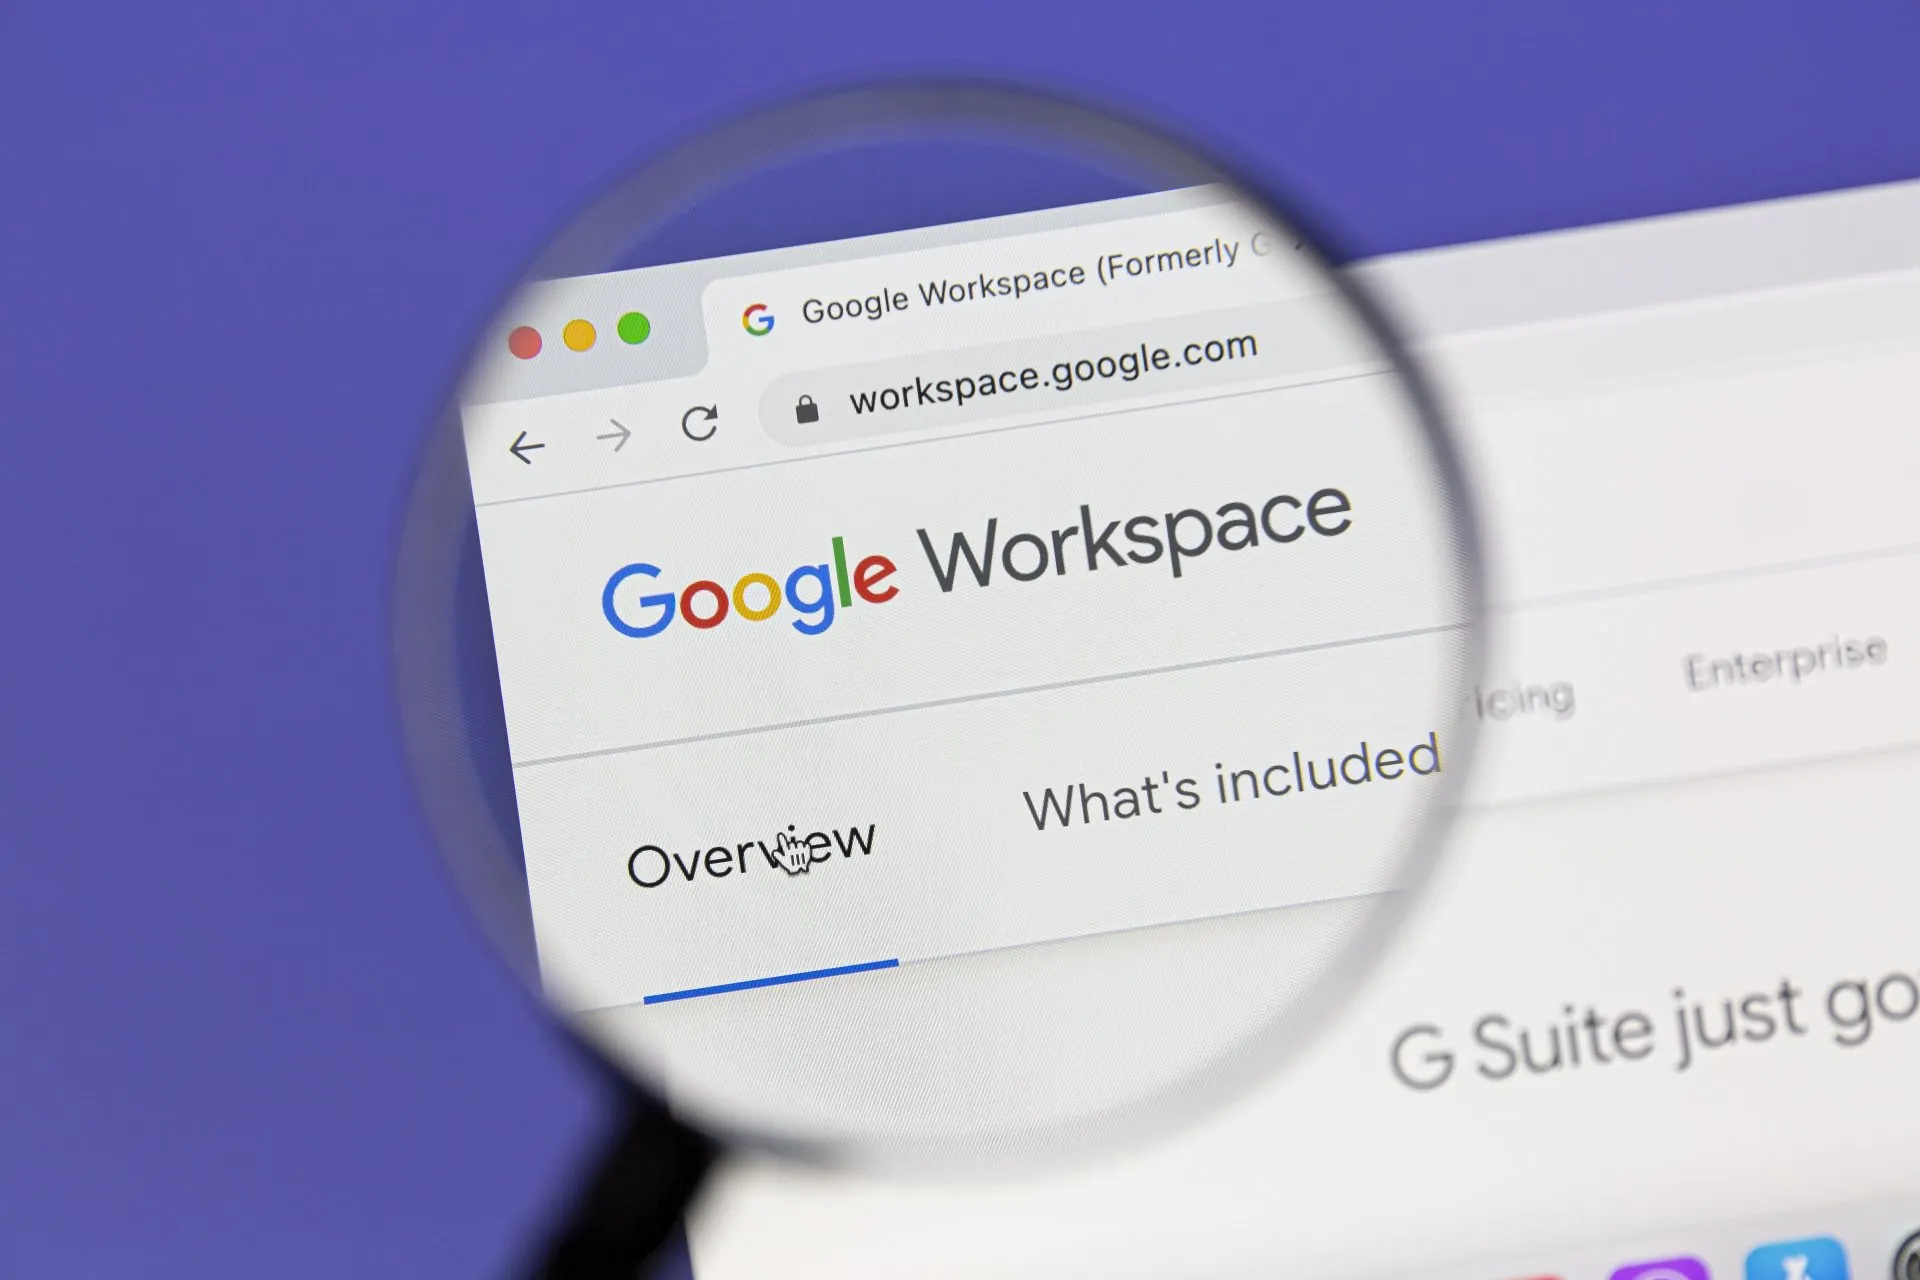 Introducing Google Workspace featured image